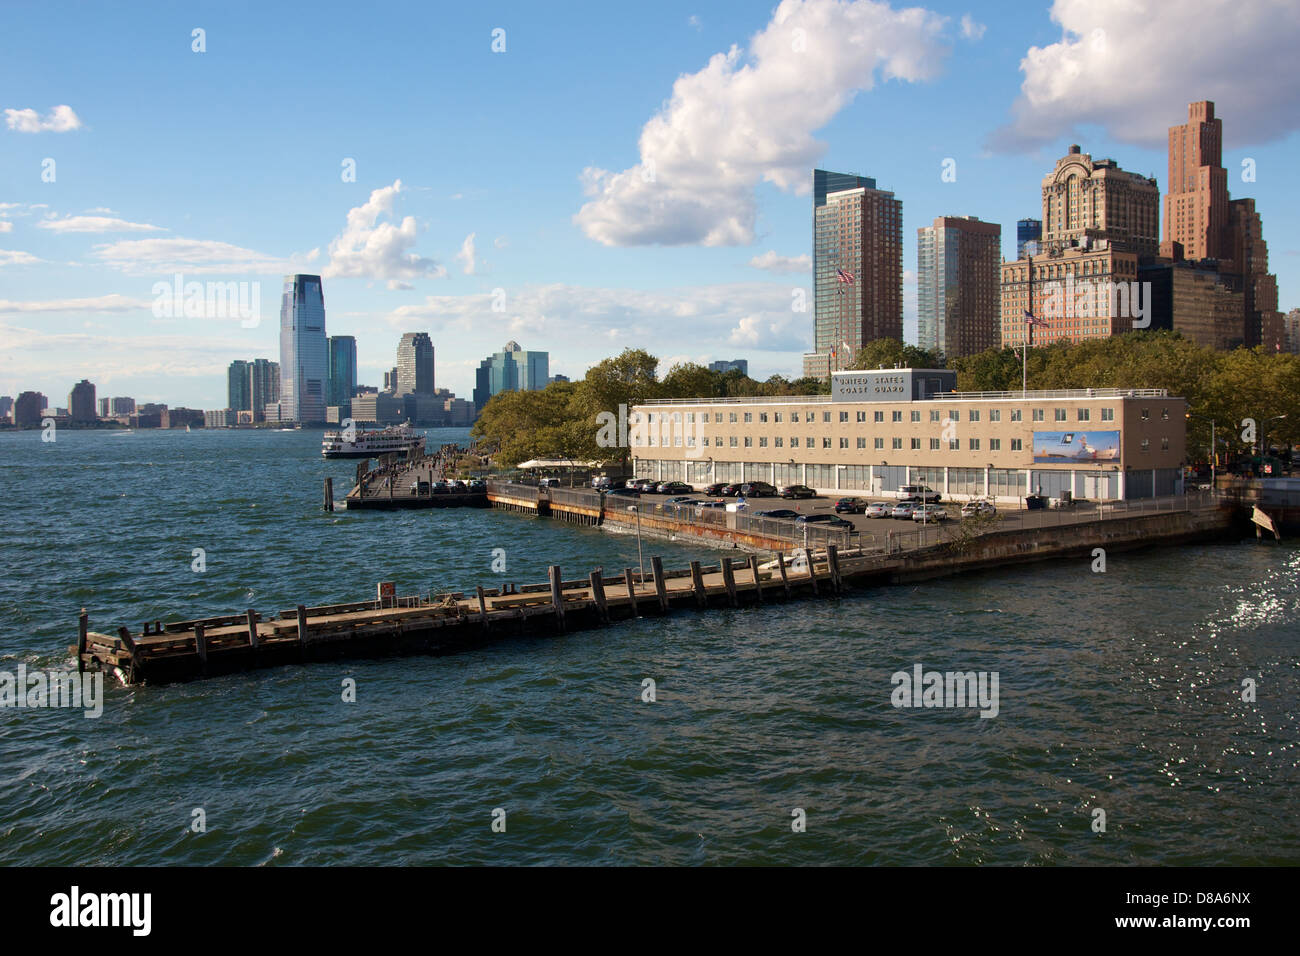 United States Coast Guard Station at South Ferry, on the Southern tip of Manhattan in New York, NY, USA. Stock Photo